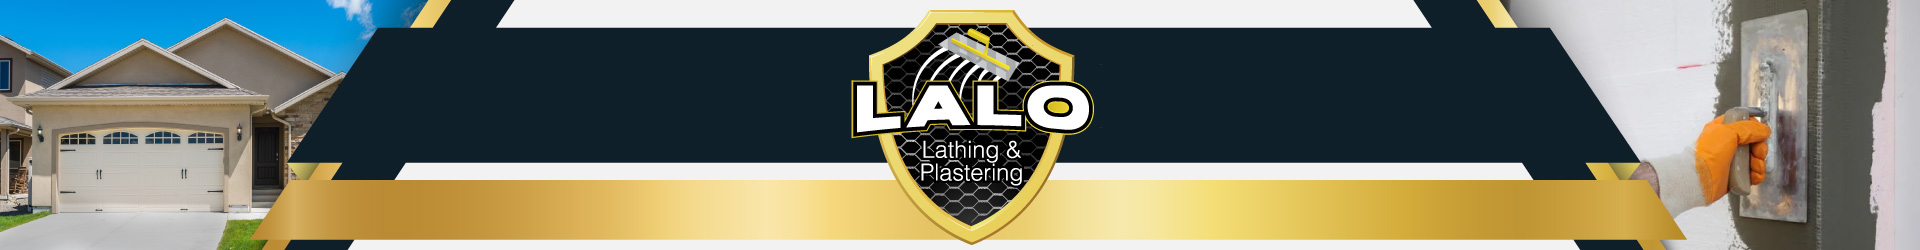 The Trusted Name In Lathing & Plastering Header